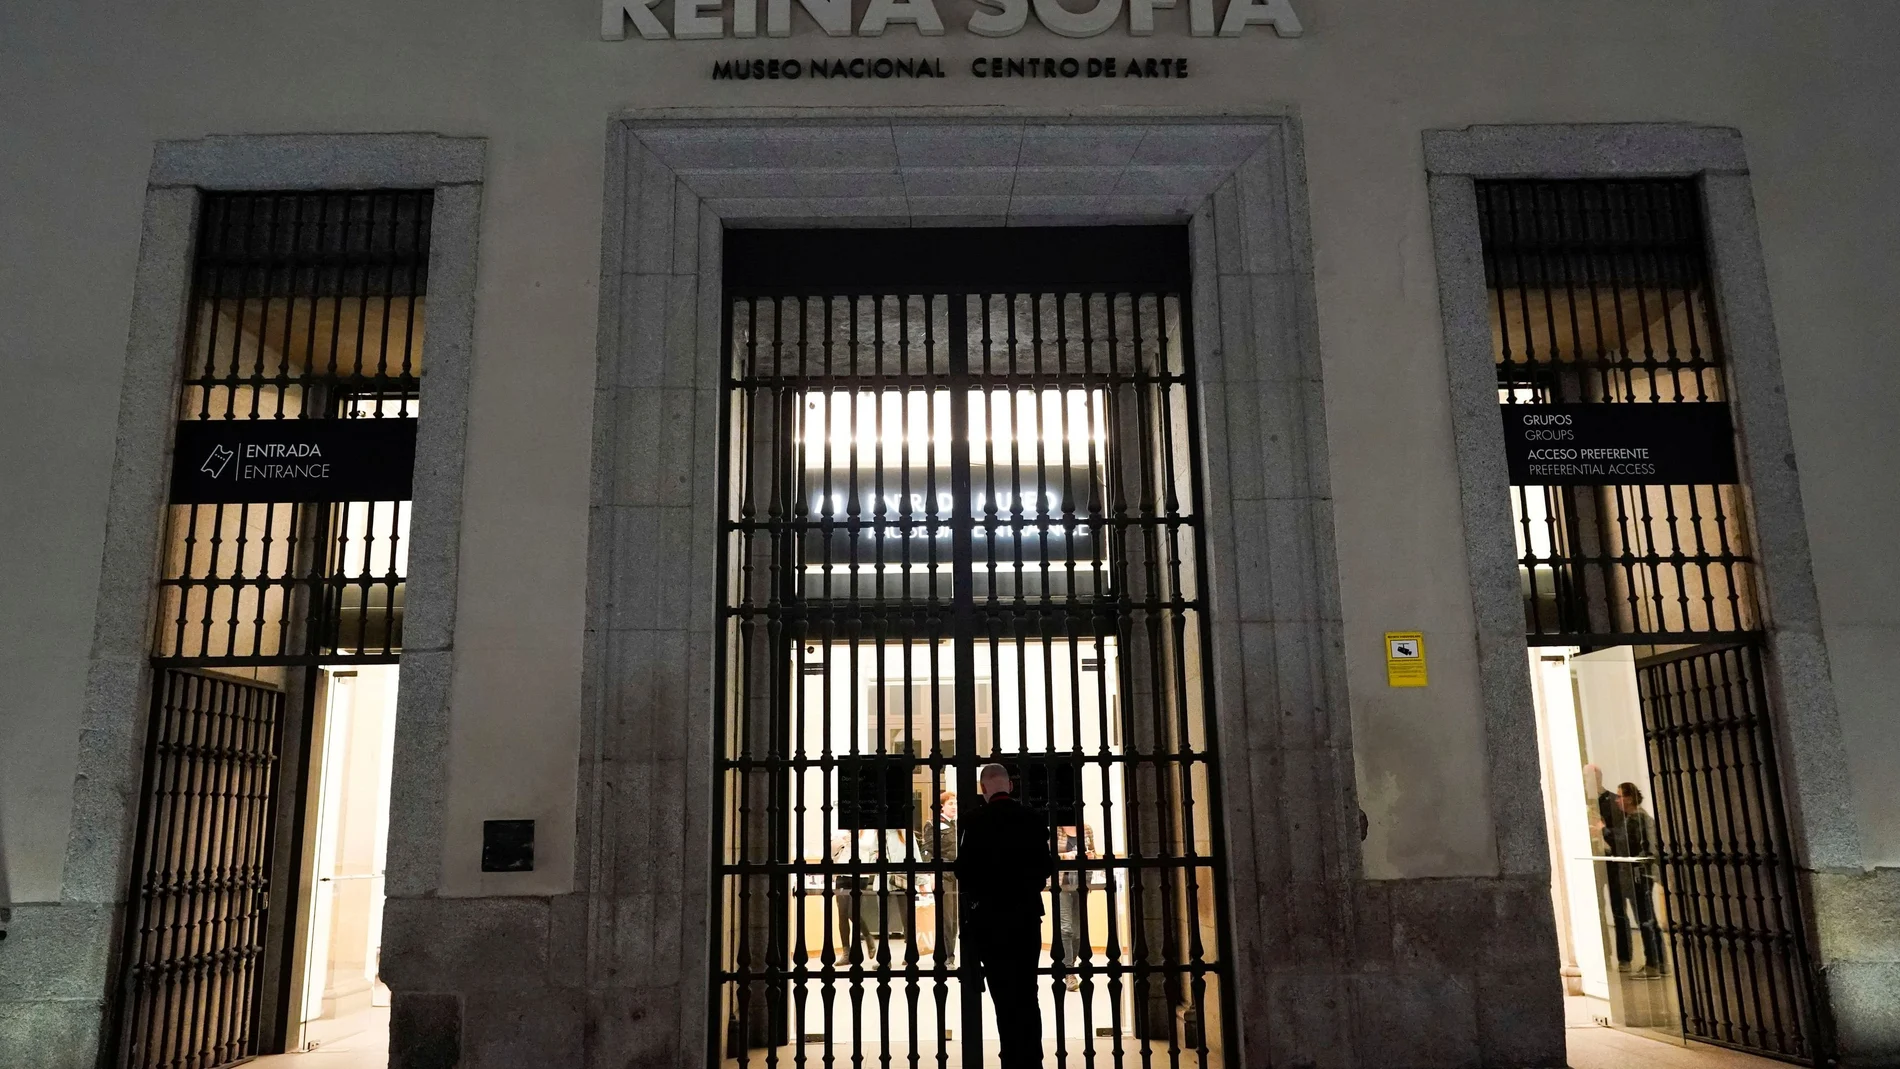 A security guard closes the gate of Reina Sofia museum in Madrid